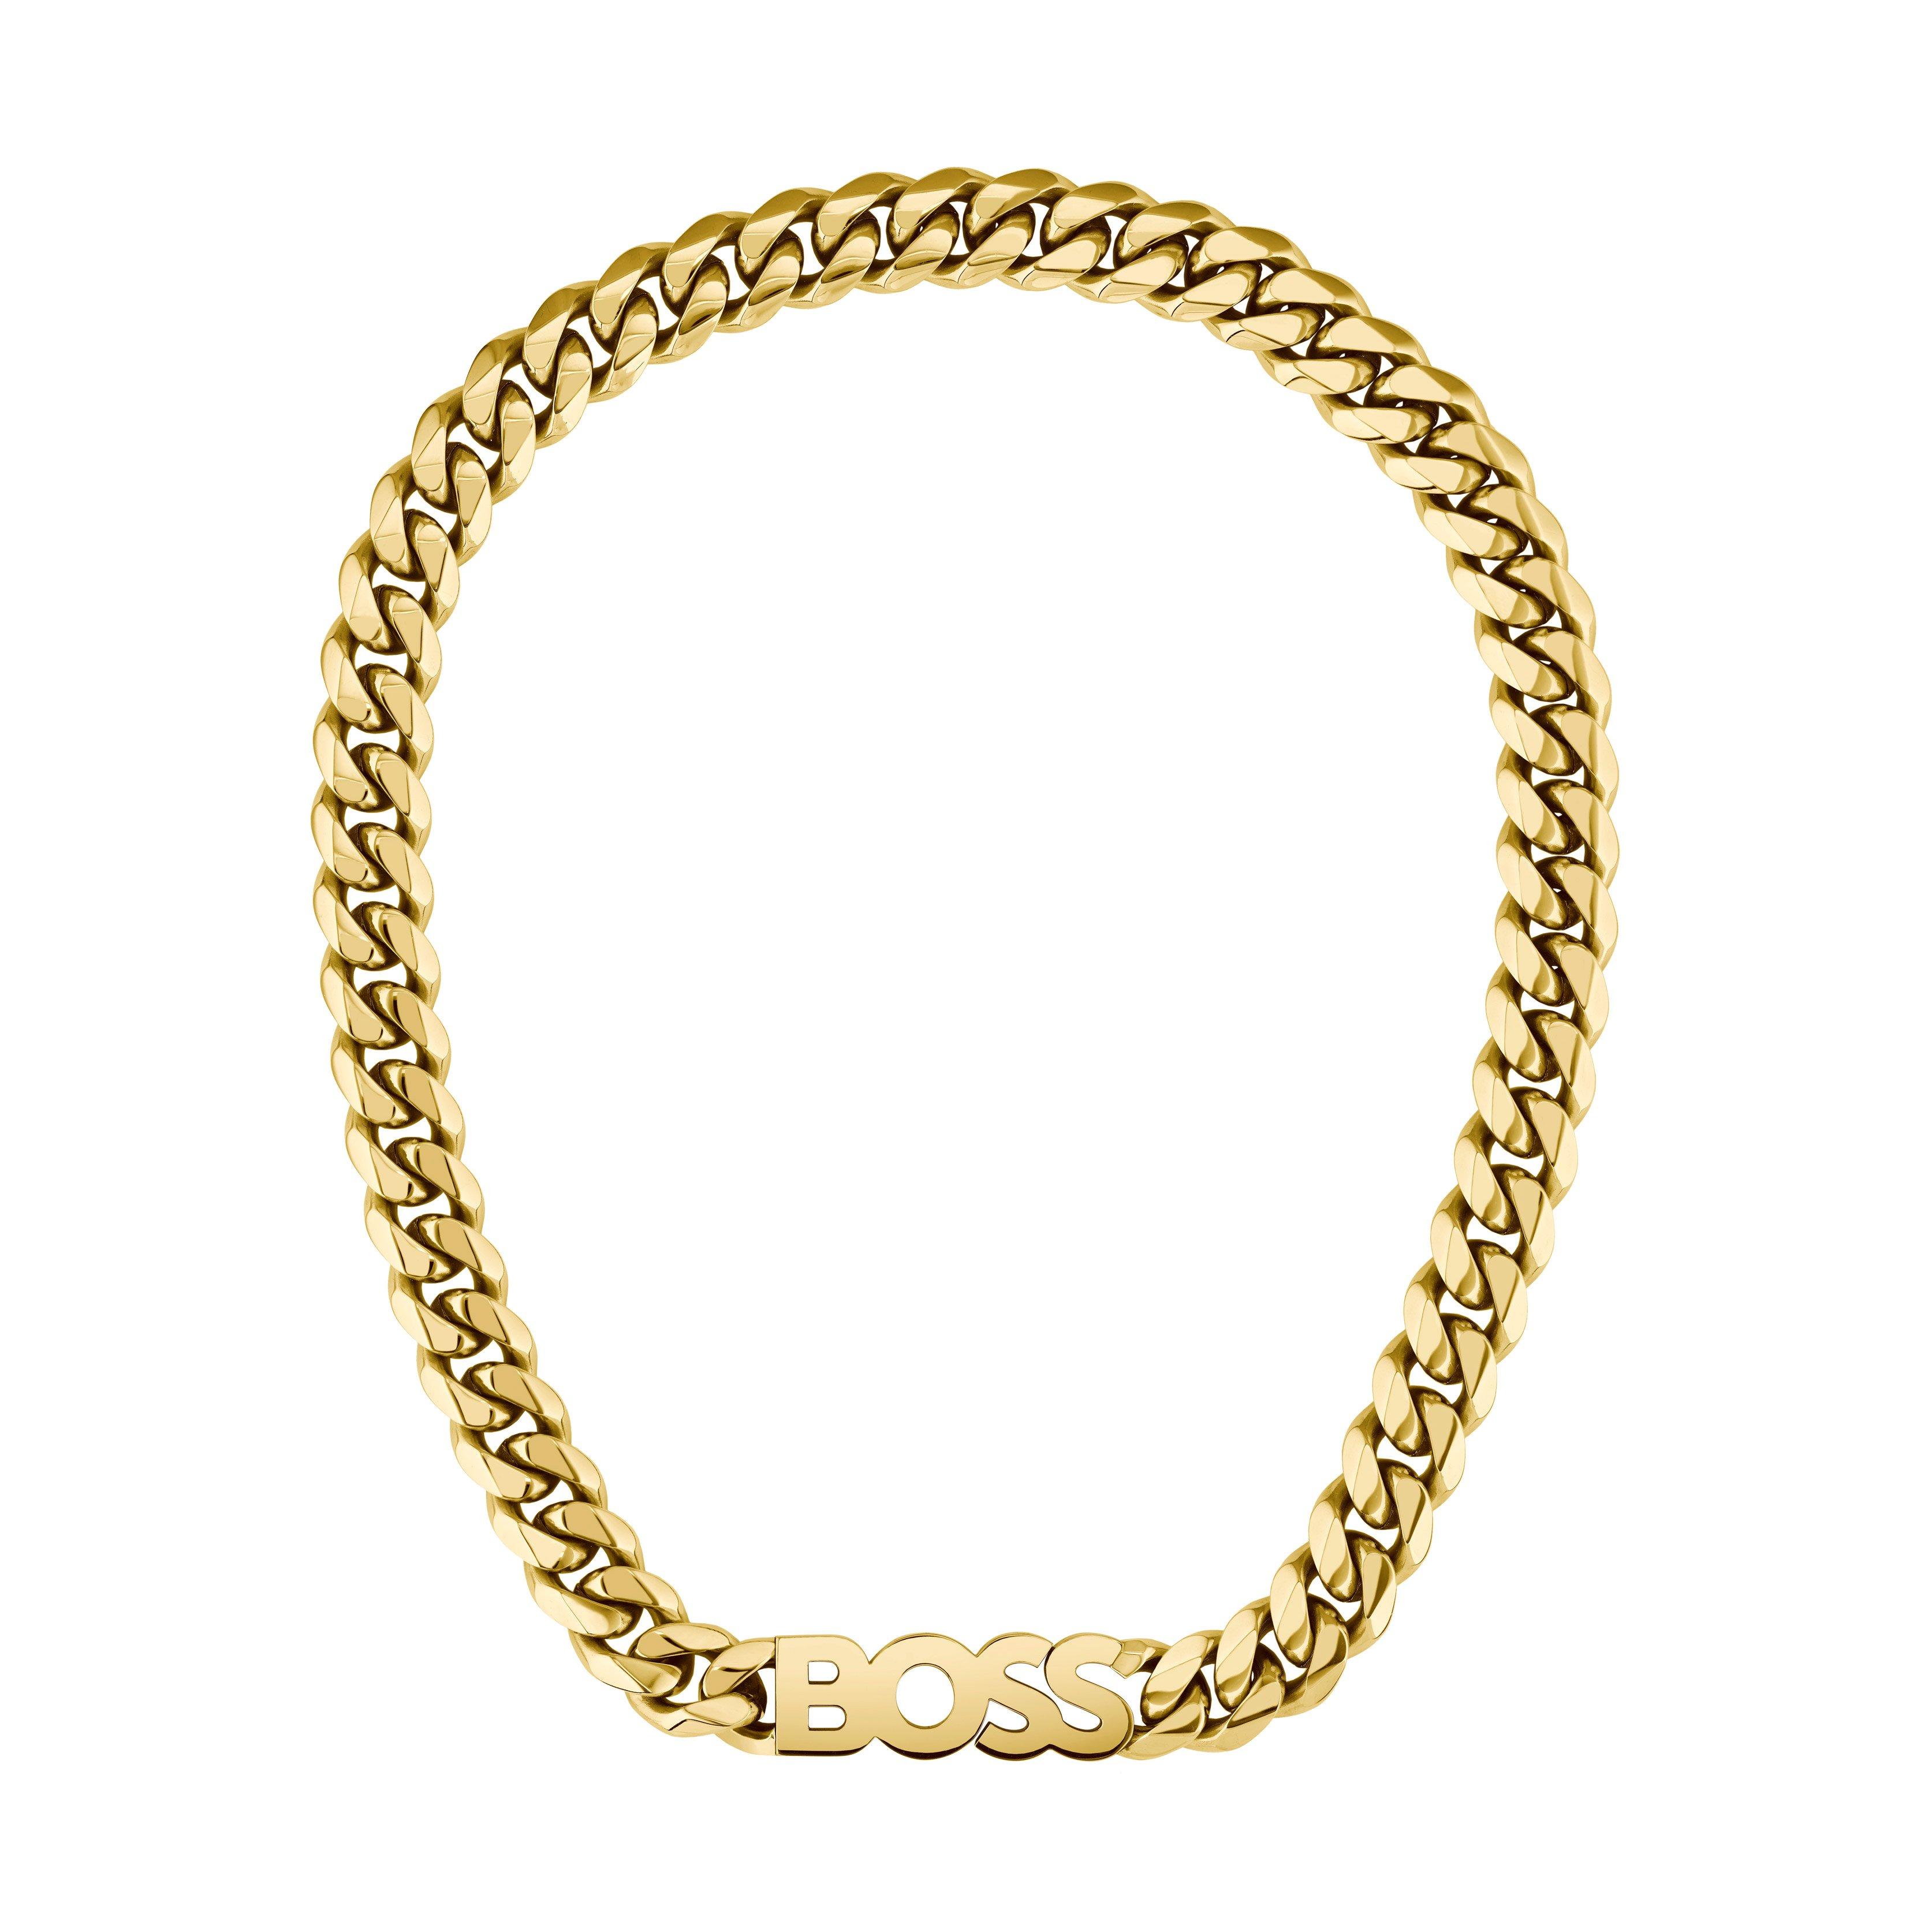 BOSS Gold Tone Men’s Necklace | 0134930 | Beaverbrooks the Jewellers